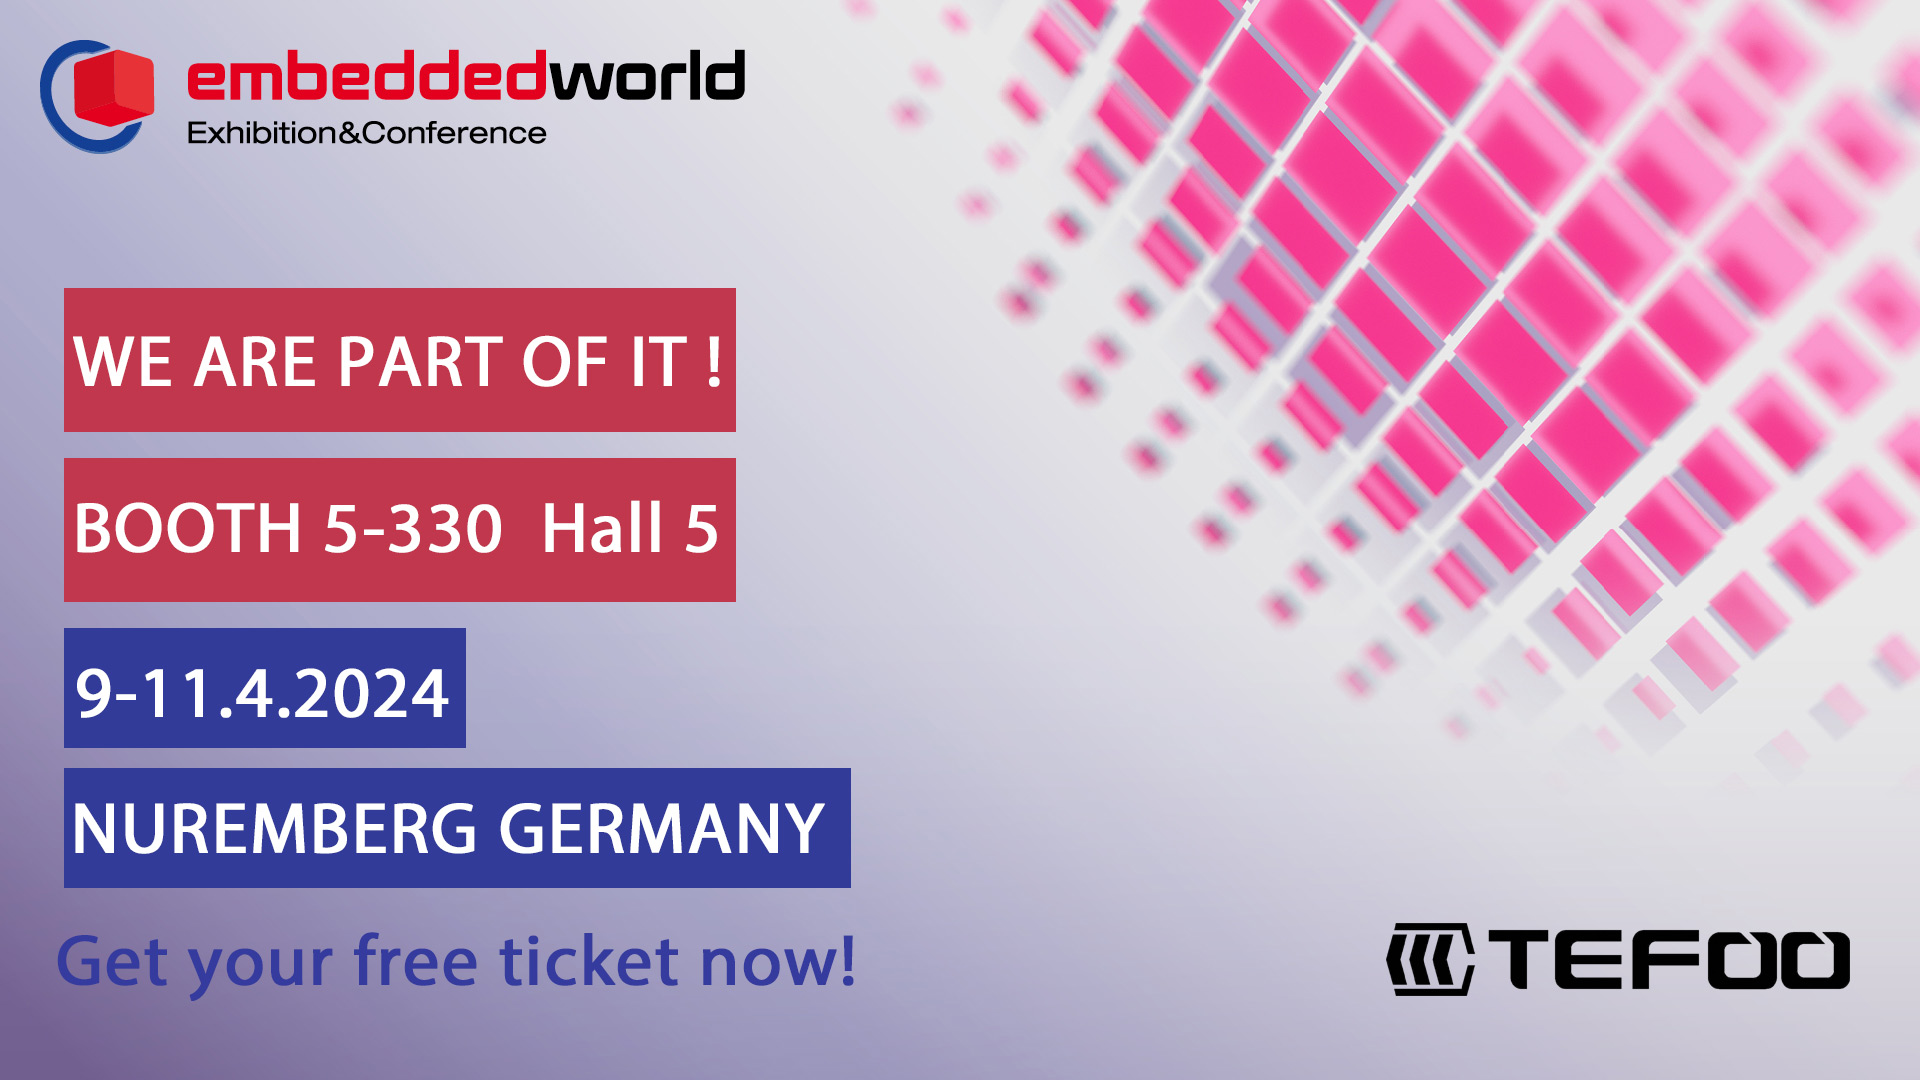 Tefoo energy is part of embedded world 2024